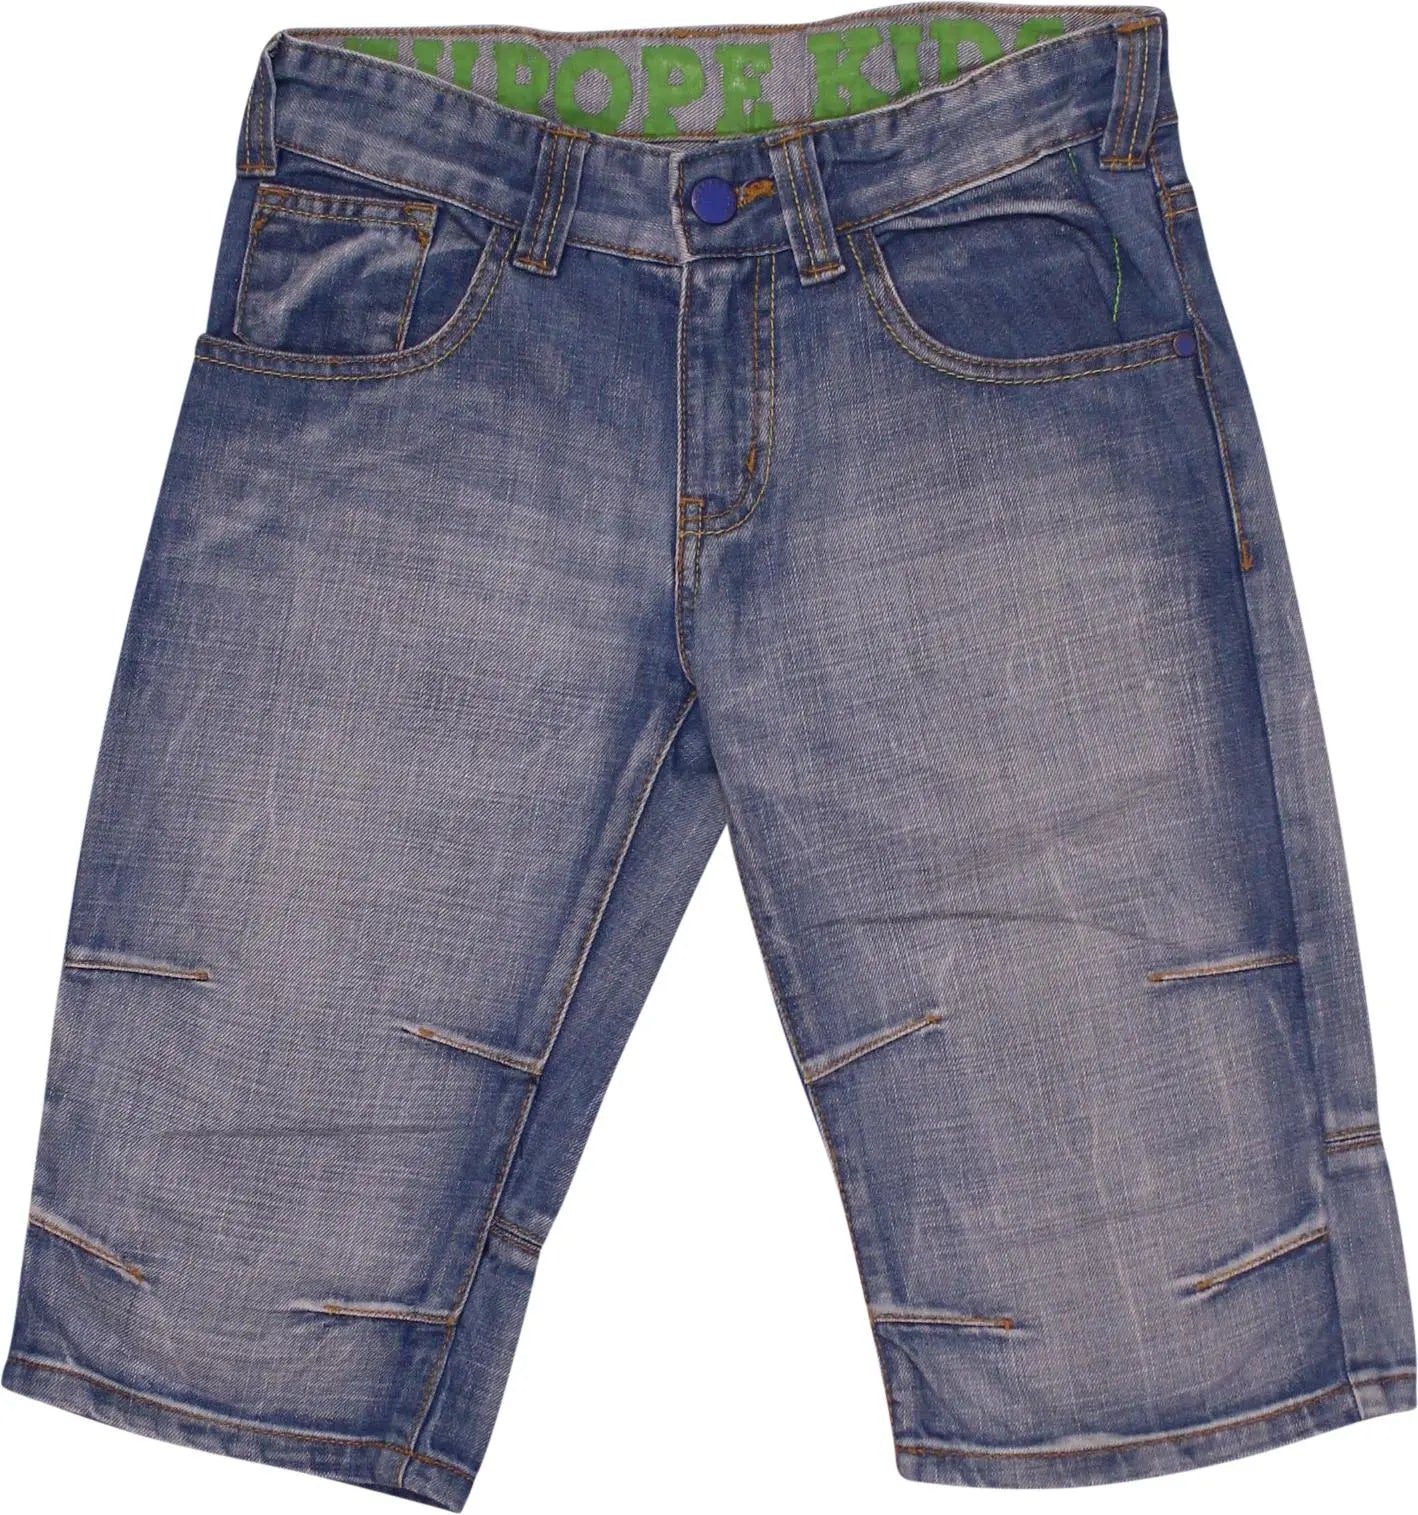 Europe Kids - BLUE11047- ThriftTale.com - Vintage and second handclothing